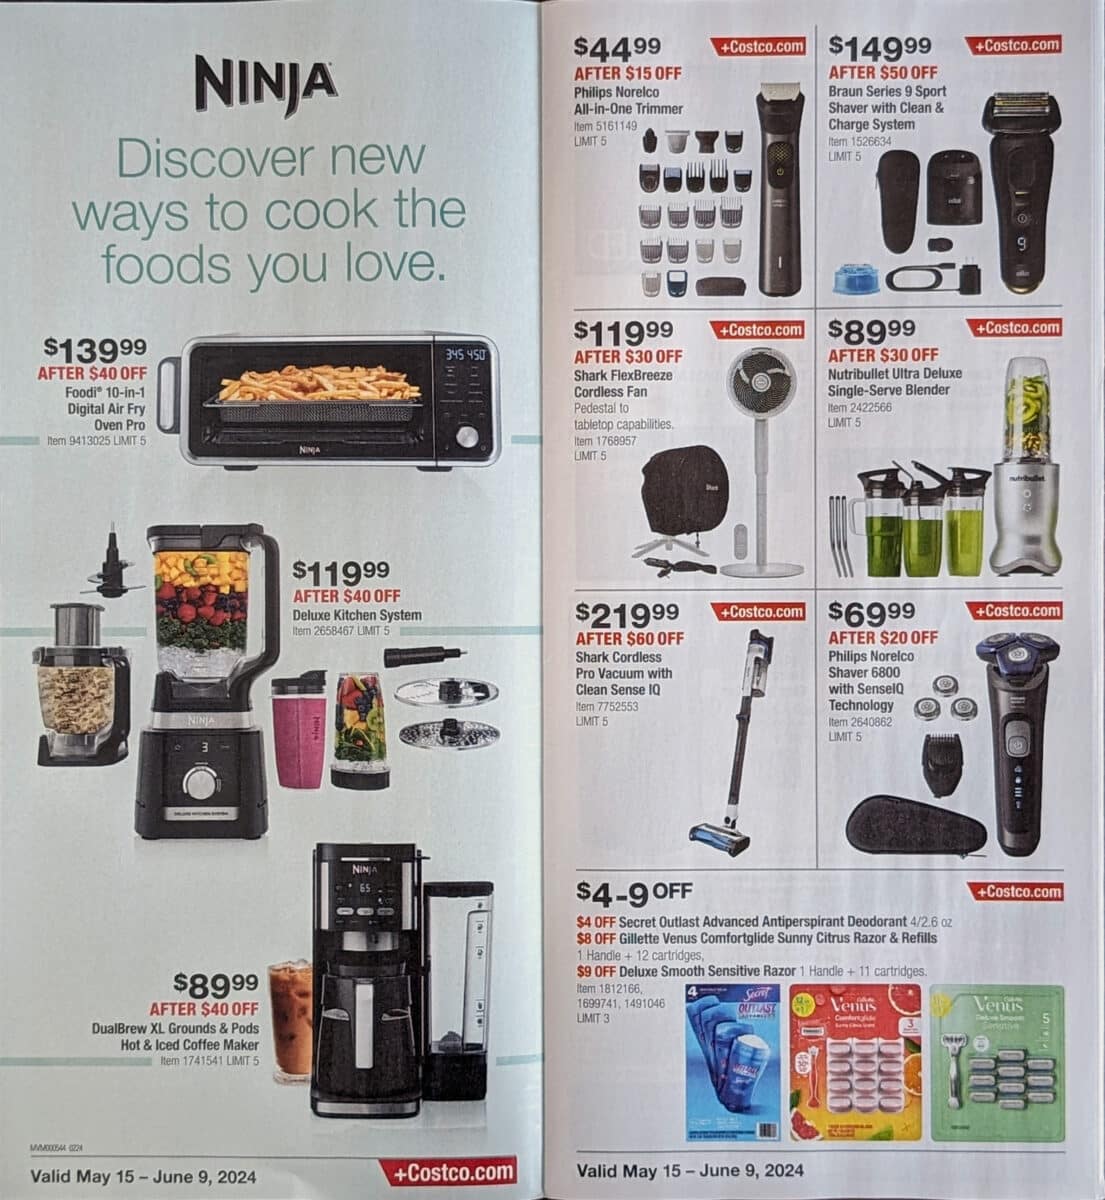 ad scan of the costco for may june 2024 with various products on sale